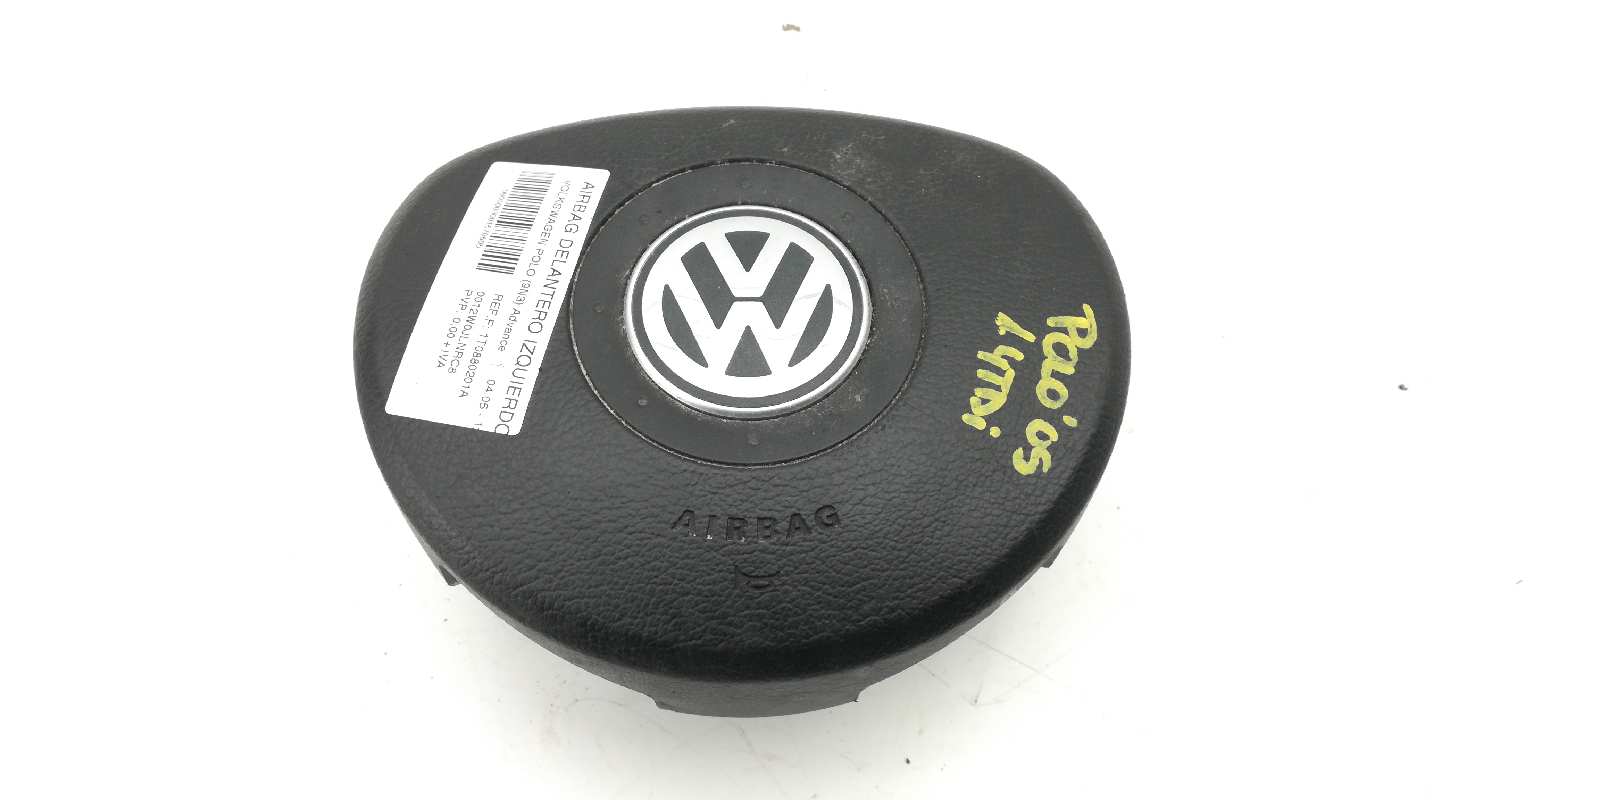 VOLKSWAGEN Polo 4 generation (2001-2009) Other Control Units 1T0880201A, 0012W0JLNRC8, 6018838 18488844